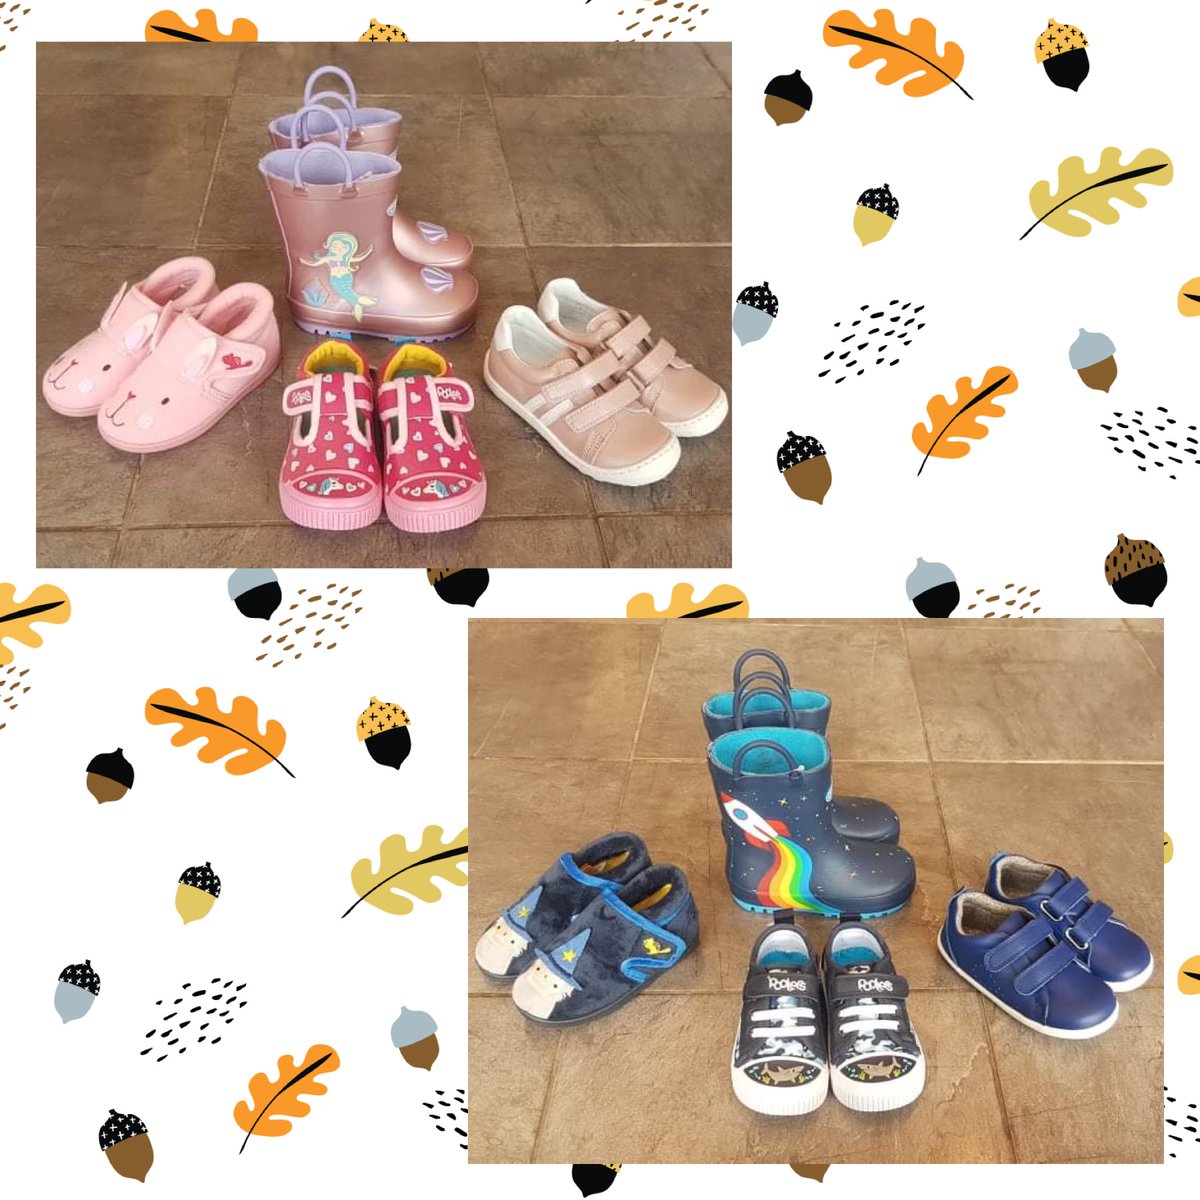 Shoes for every day at Susie and Sams!